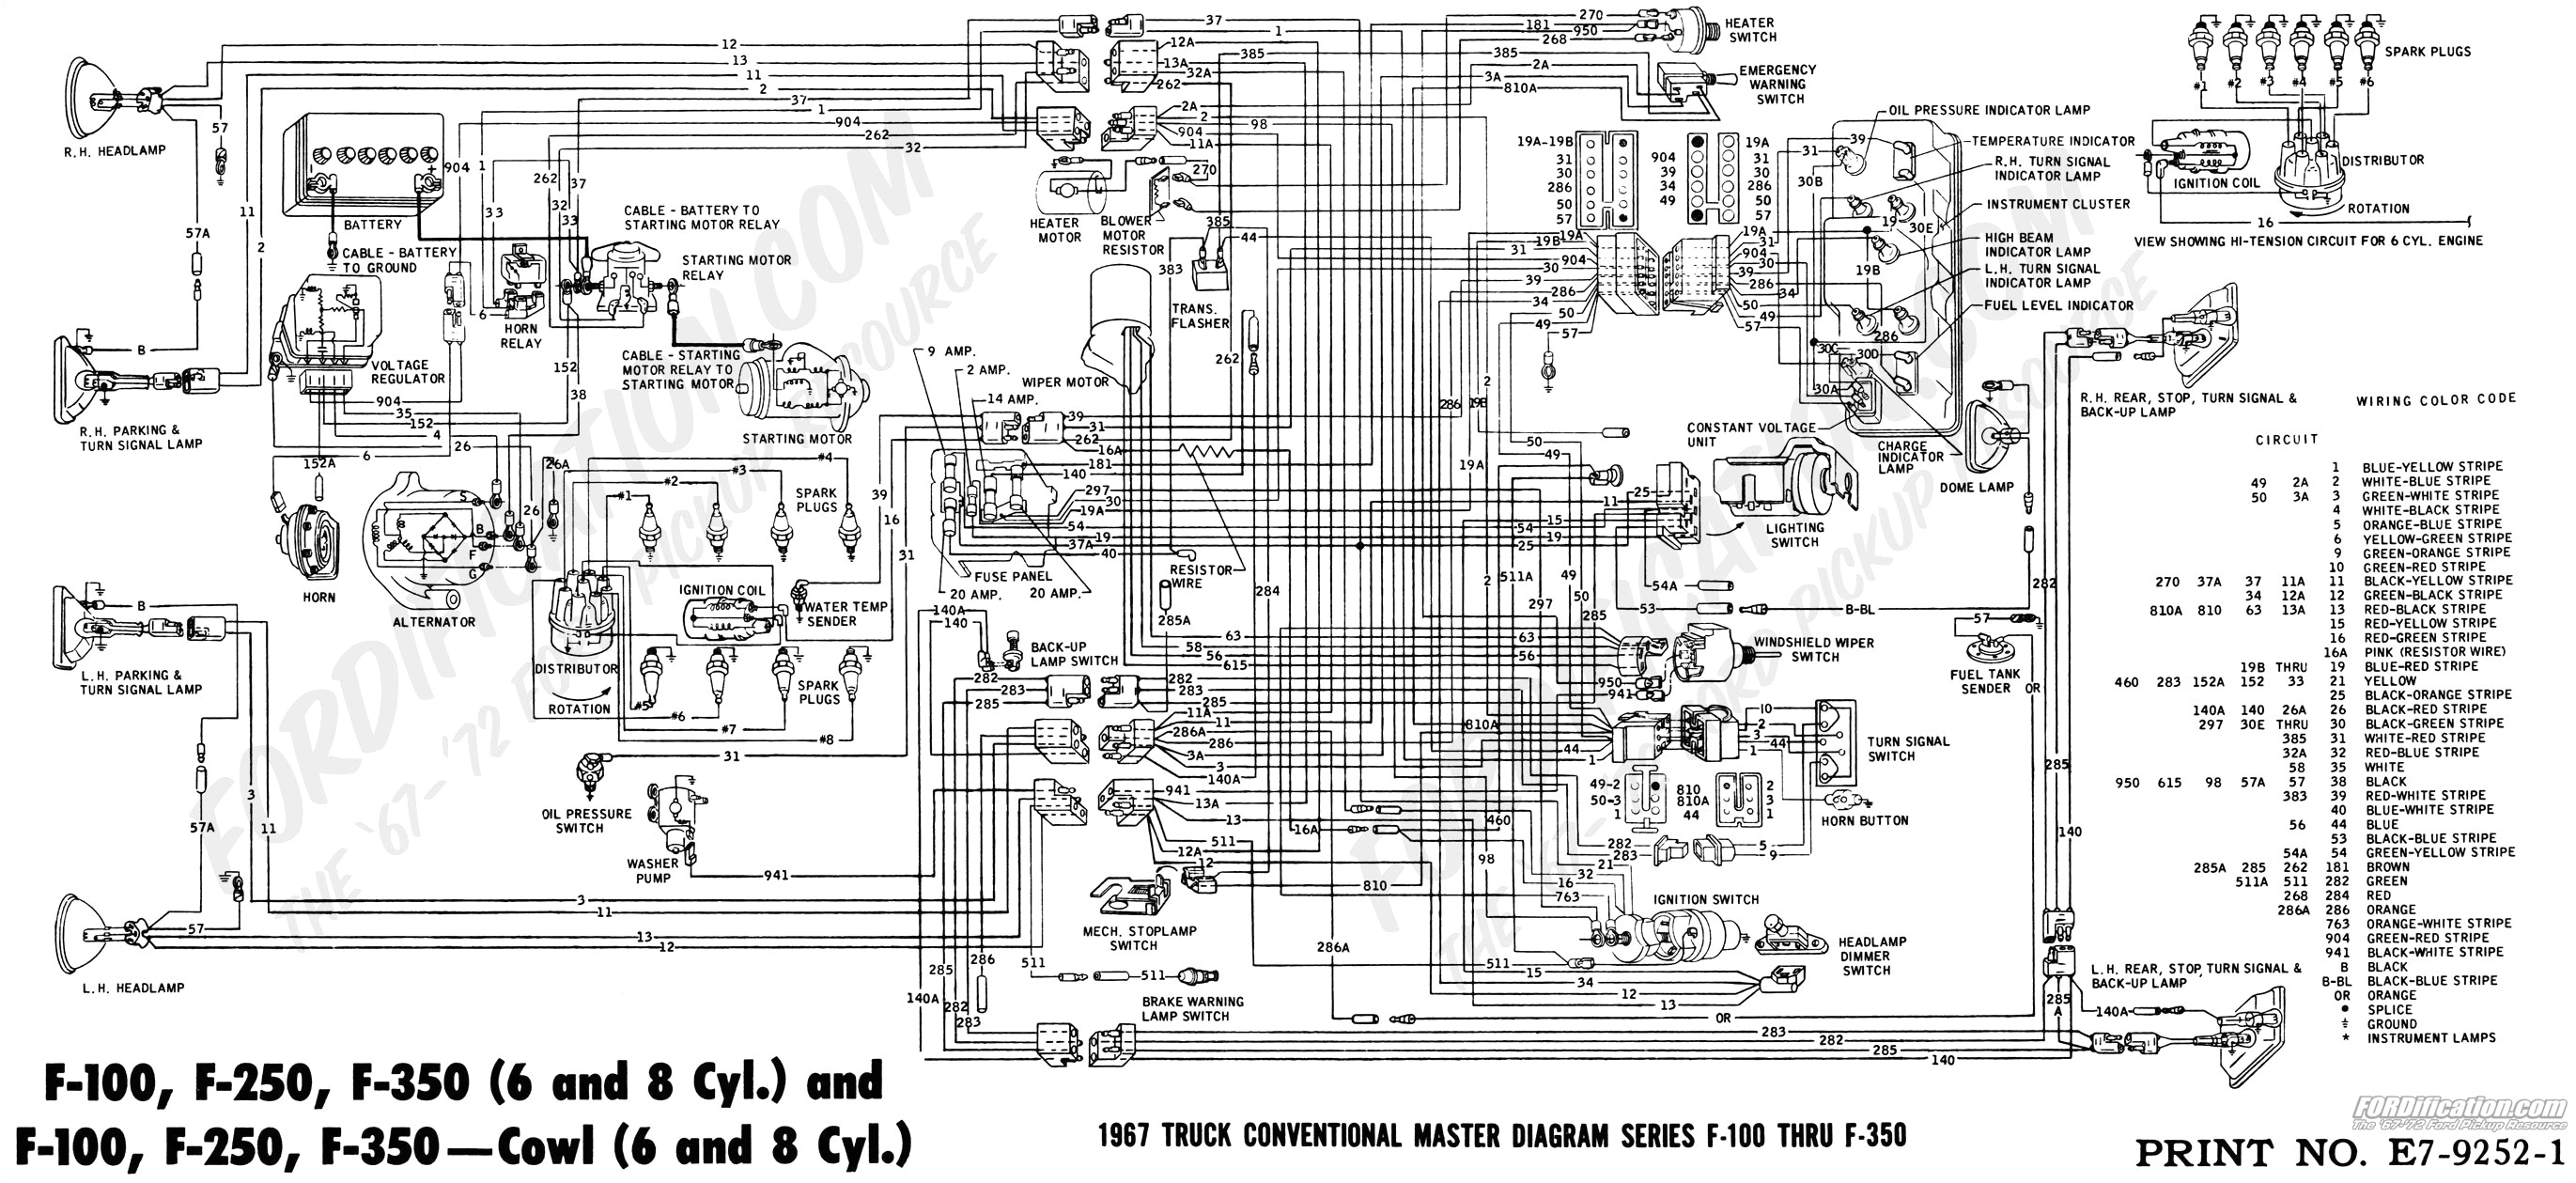 91 ford f 150 distributor wiring wiring diagram sheet x 1996 ford ignition switch diagram